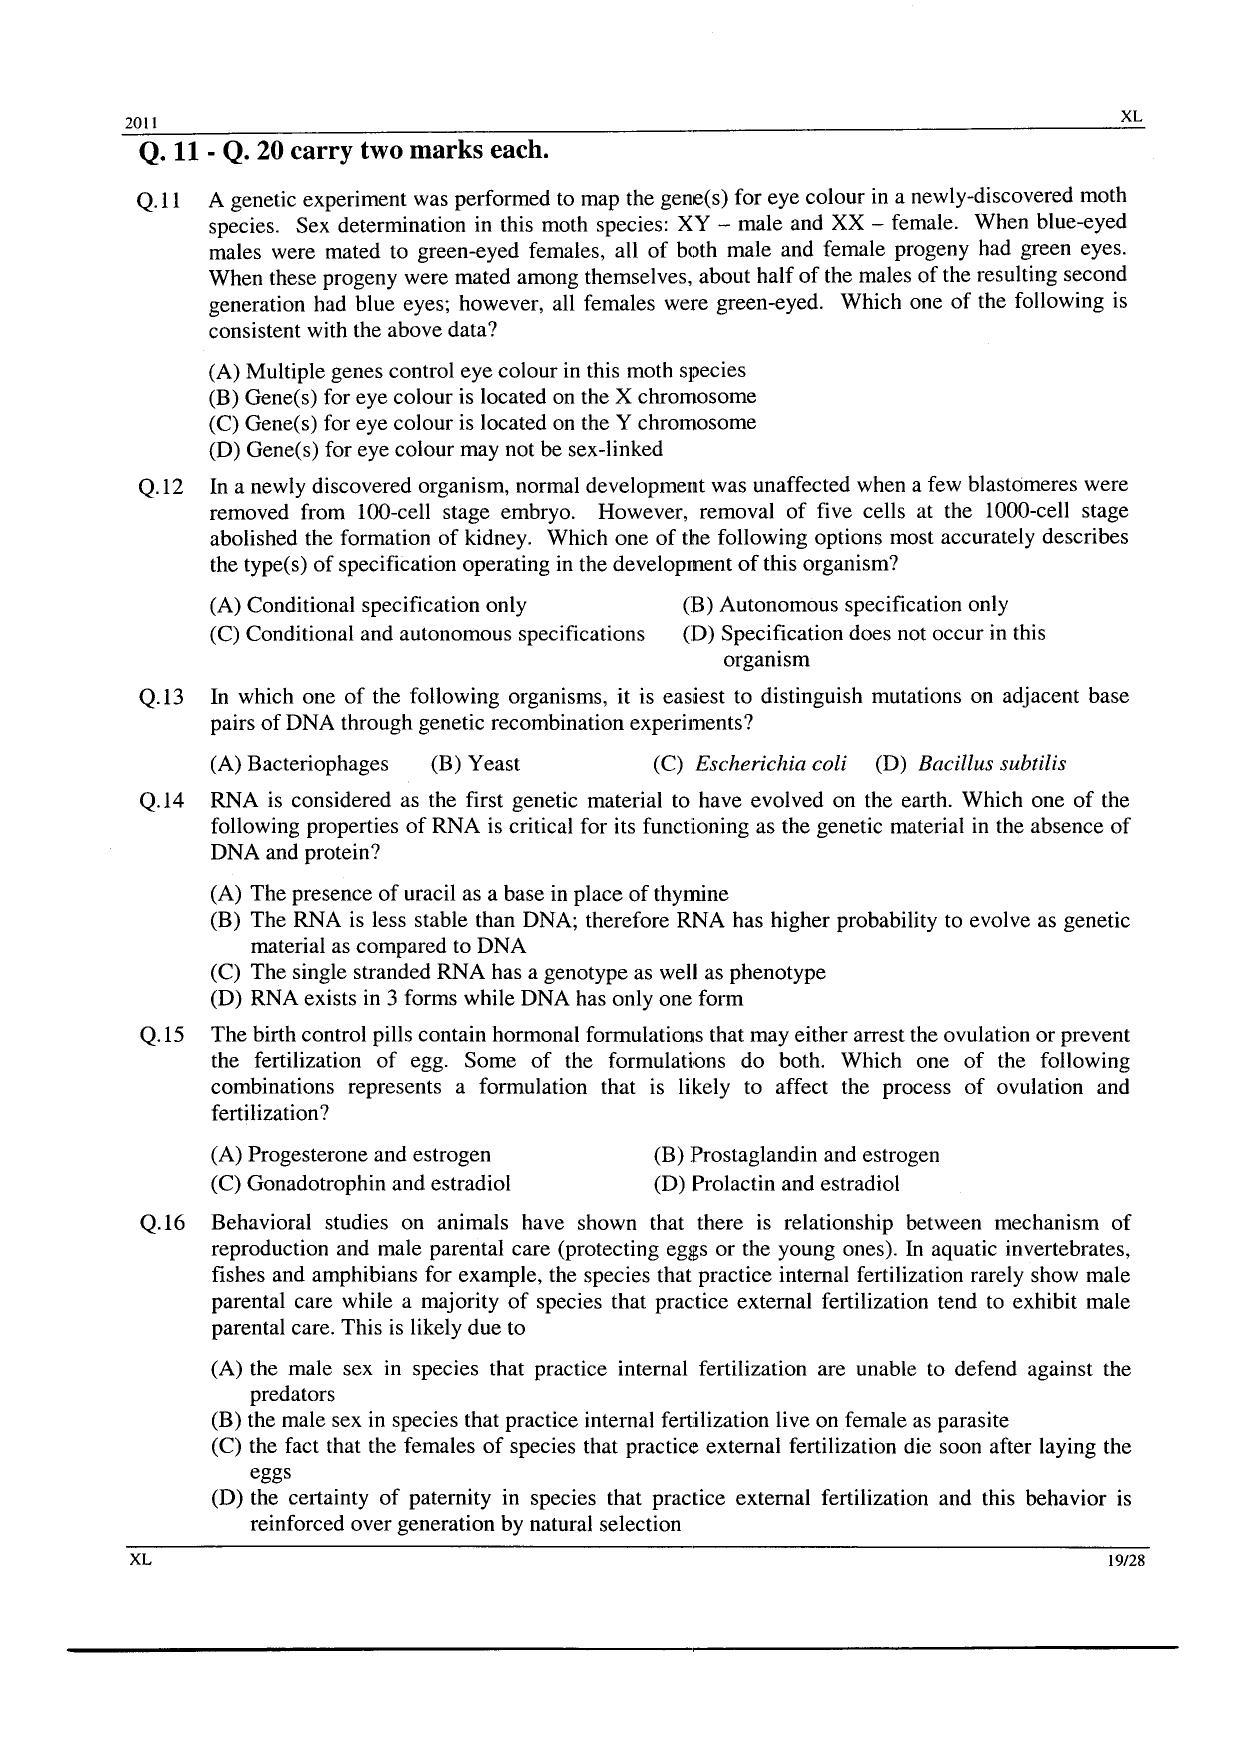 GATE 2011 Life Sciences (XL) Question Paper with Answer Key - Page 19